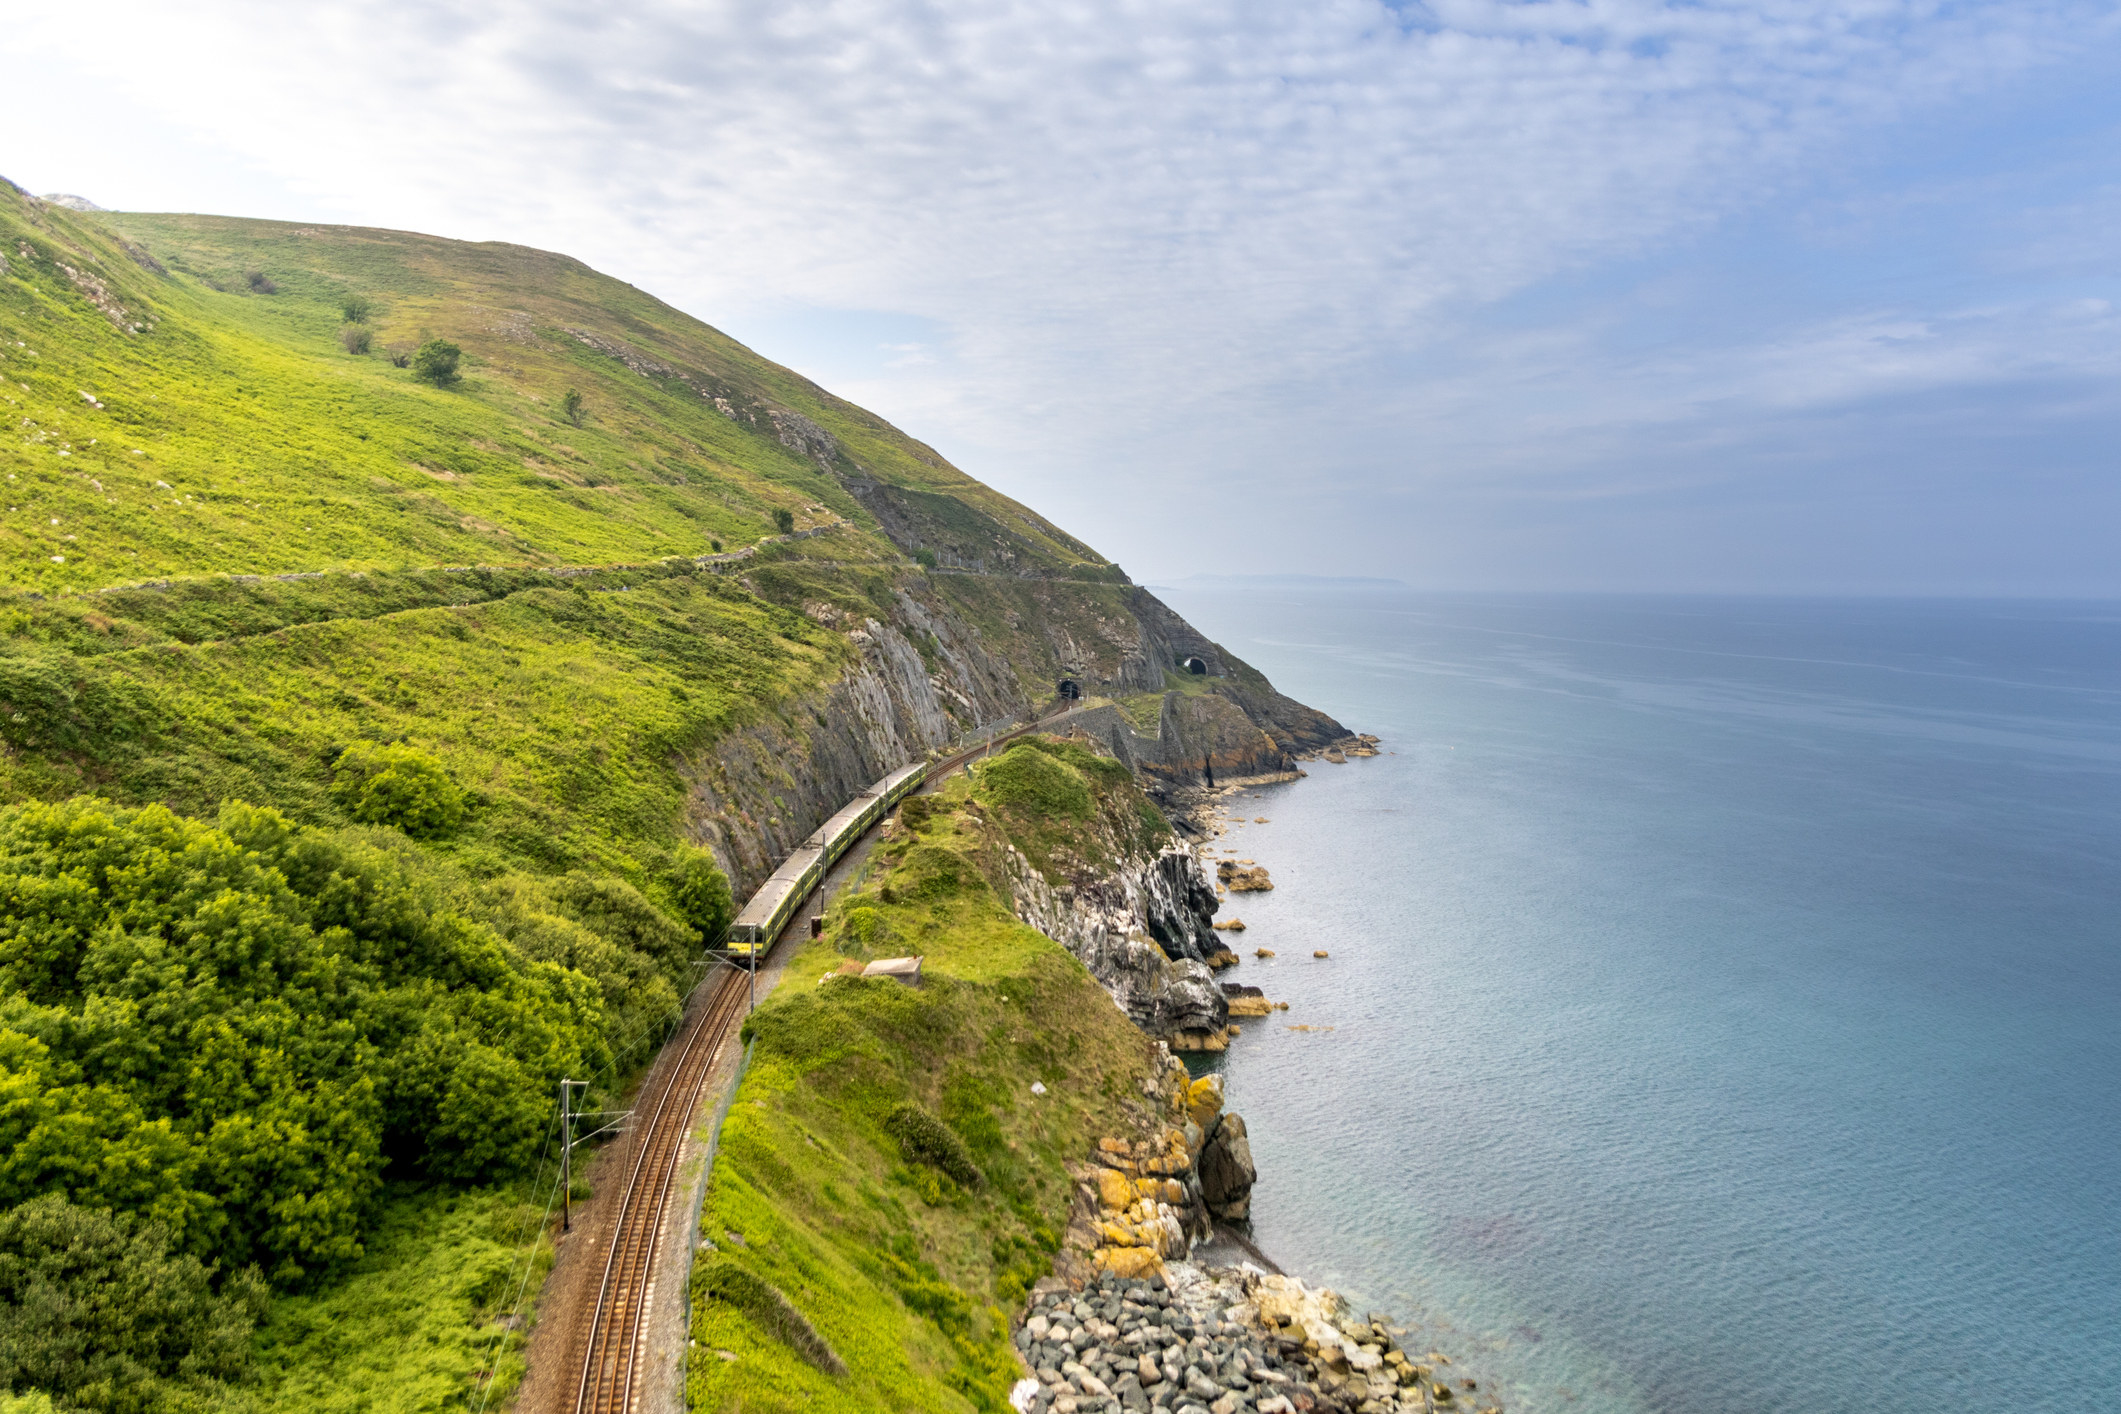 A train next to the sea in Ireland